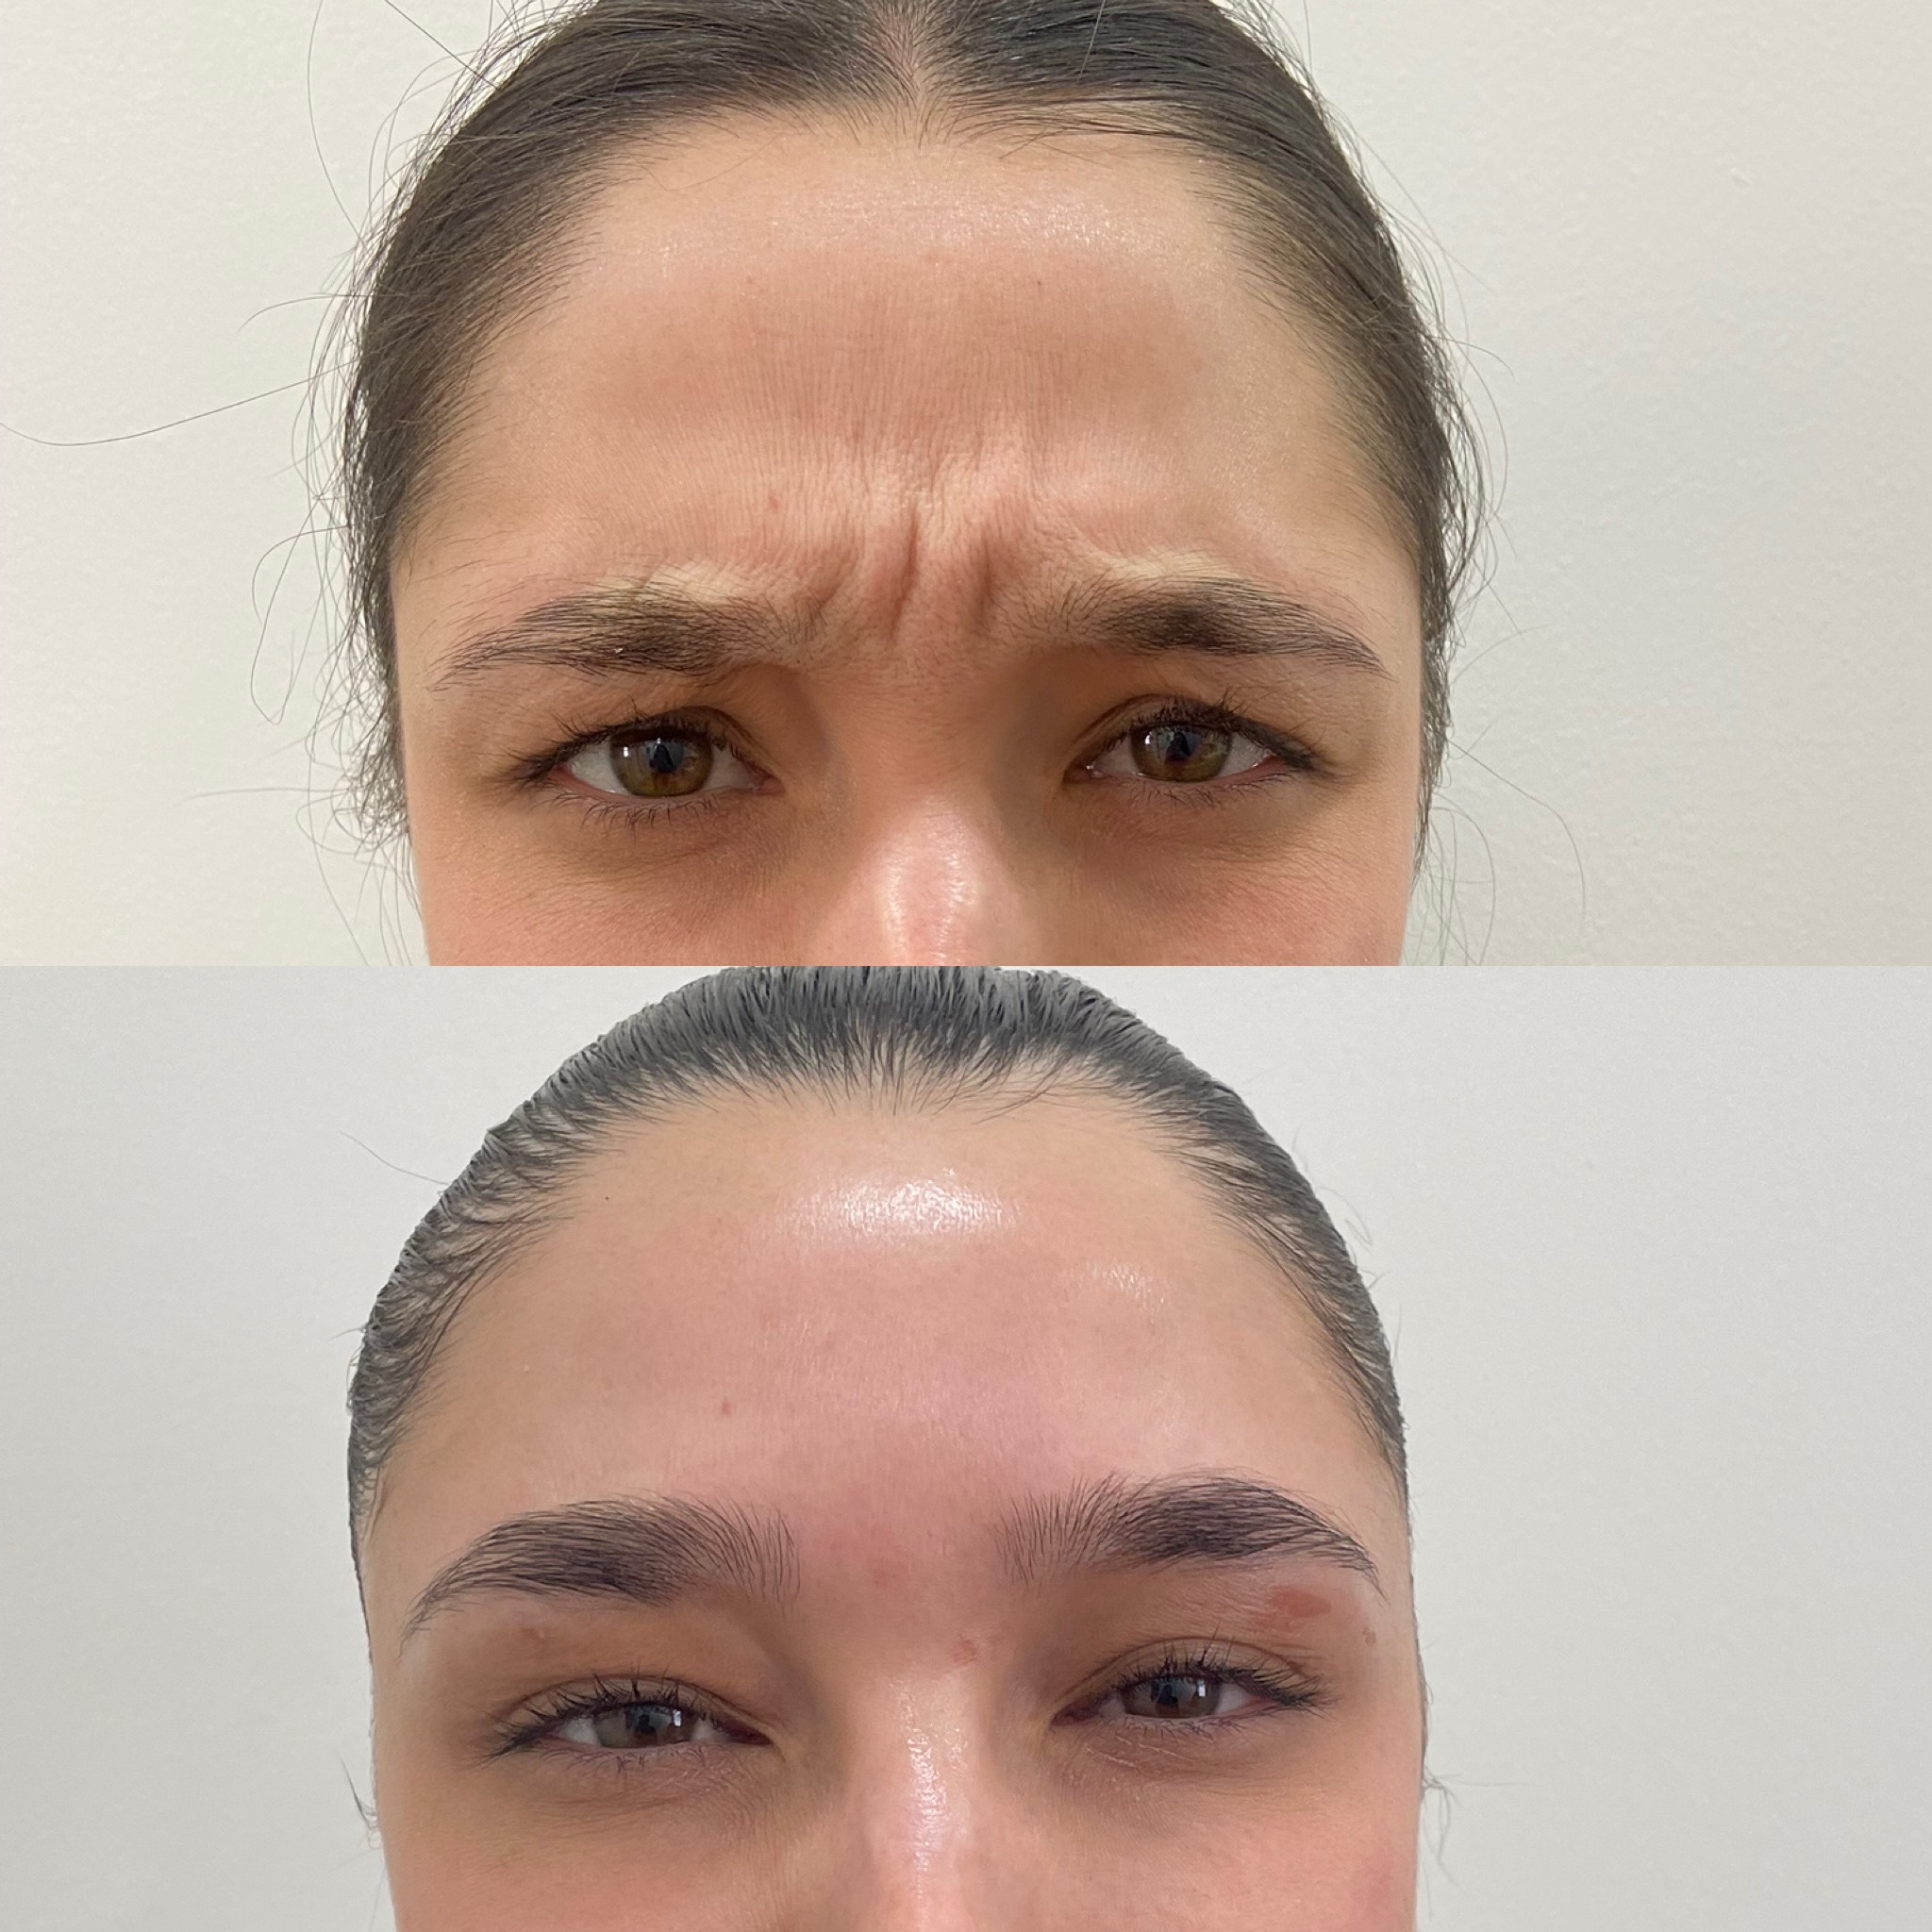 Before and After Botox Treatment | Beauty Boost Med Spa in Newport Beach, CA